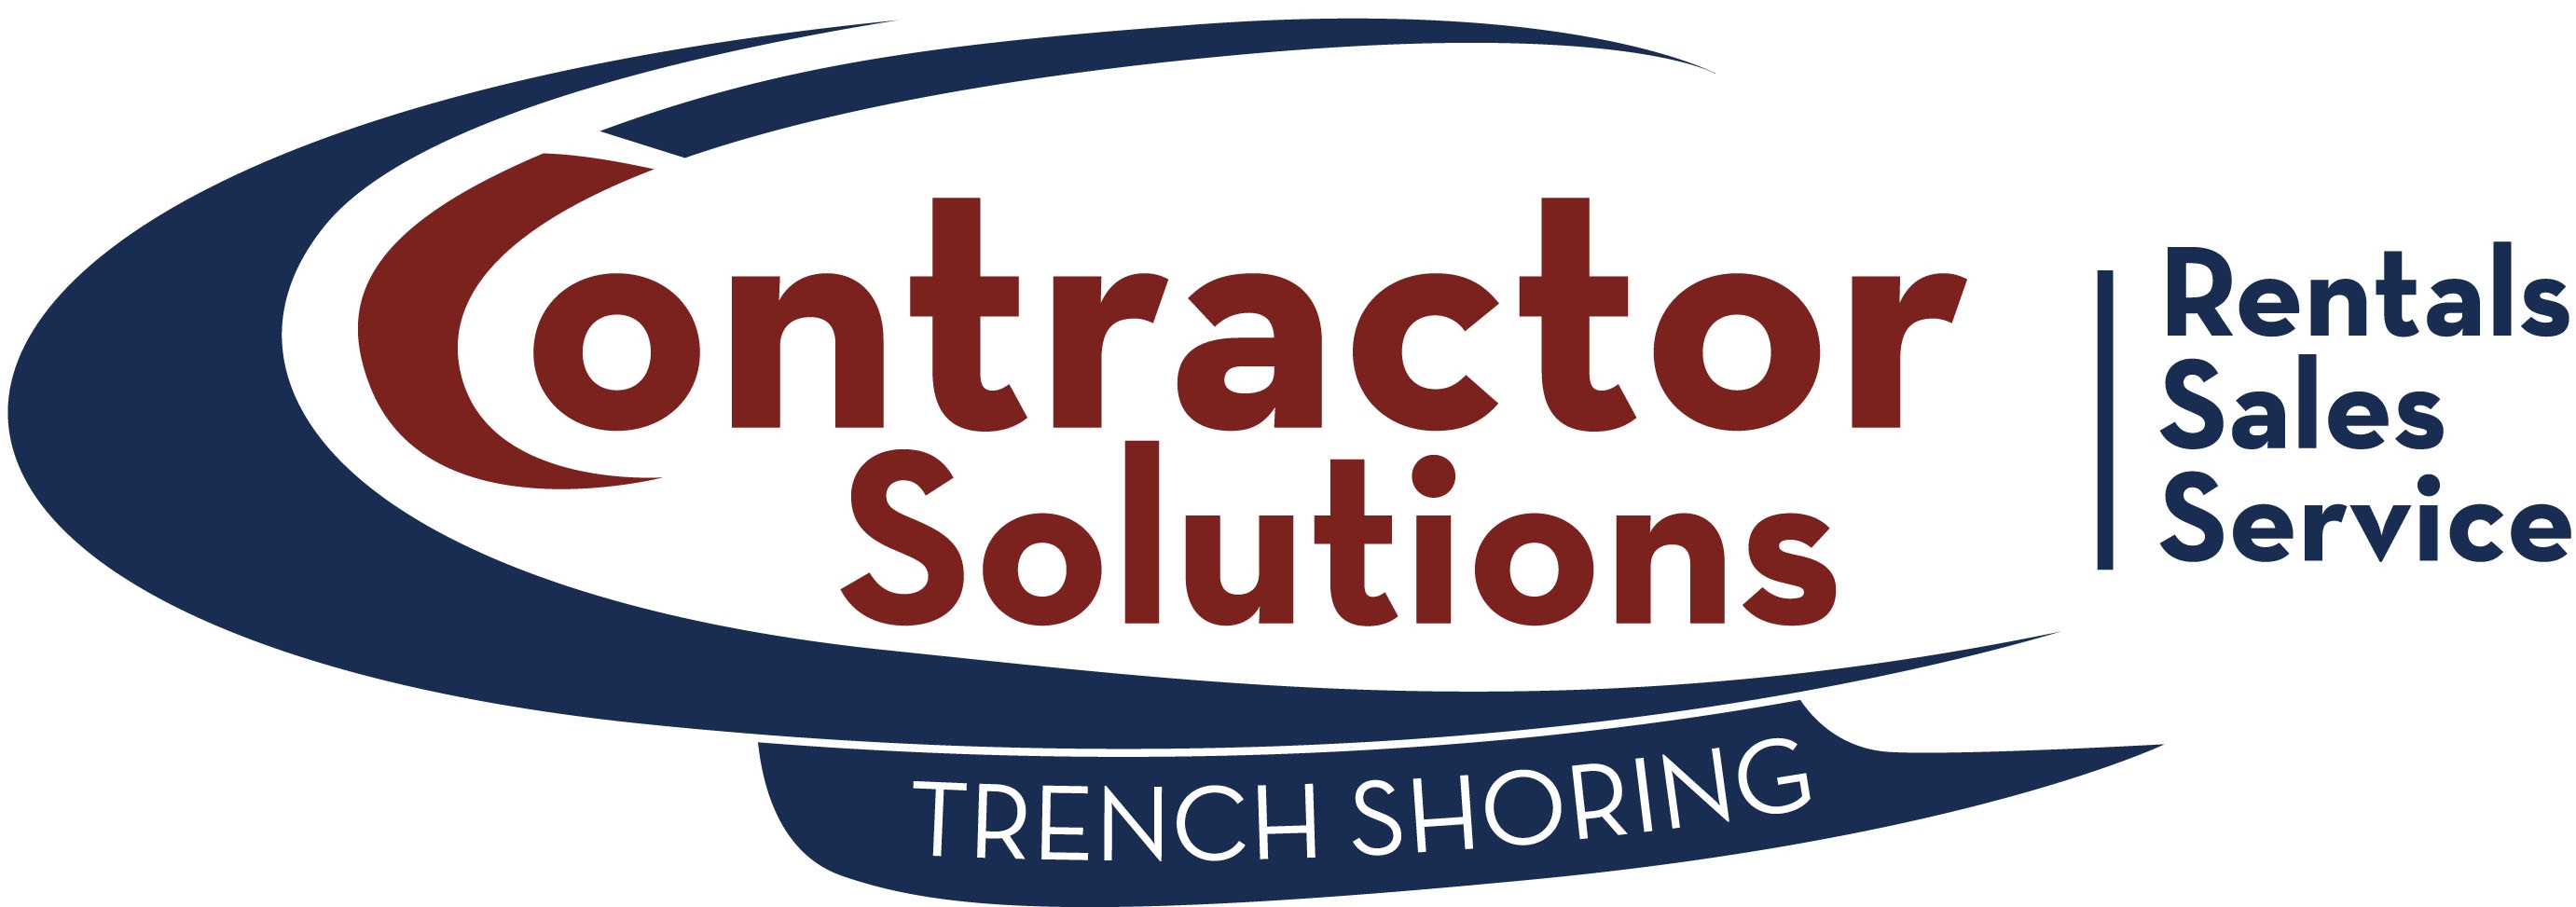 Contractor Solutions